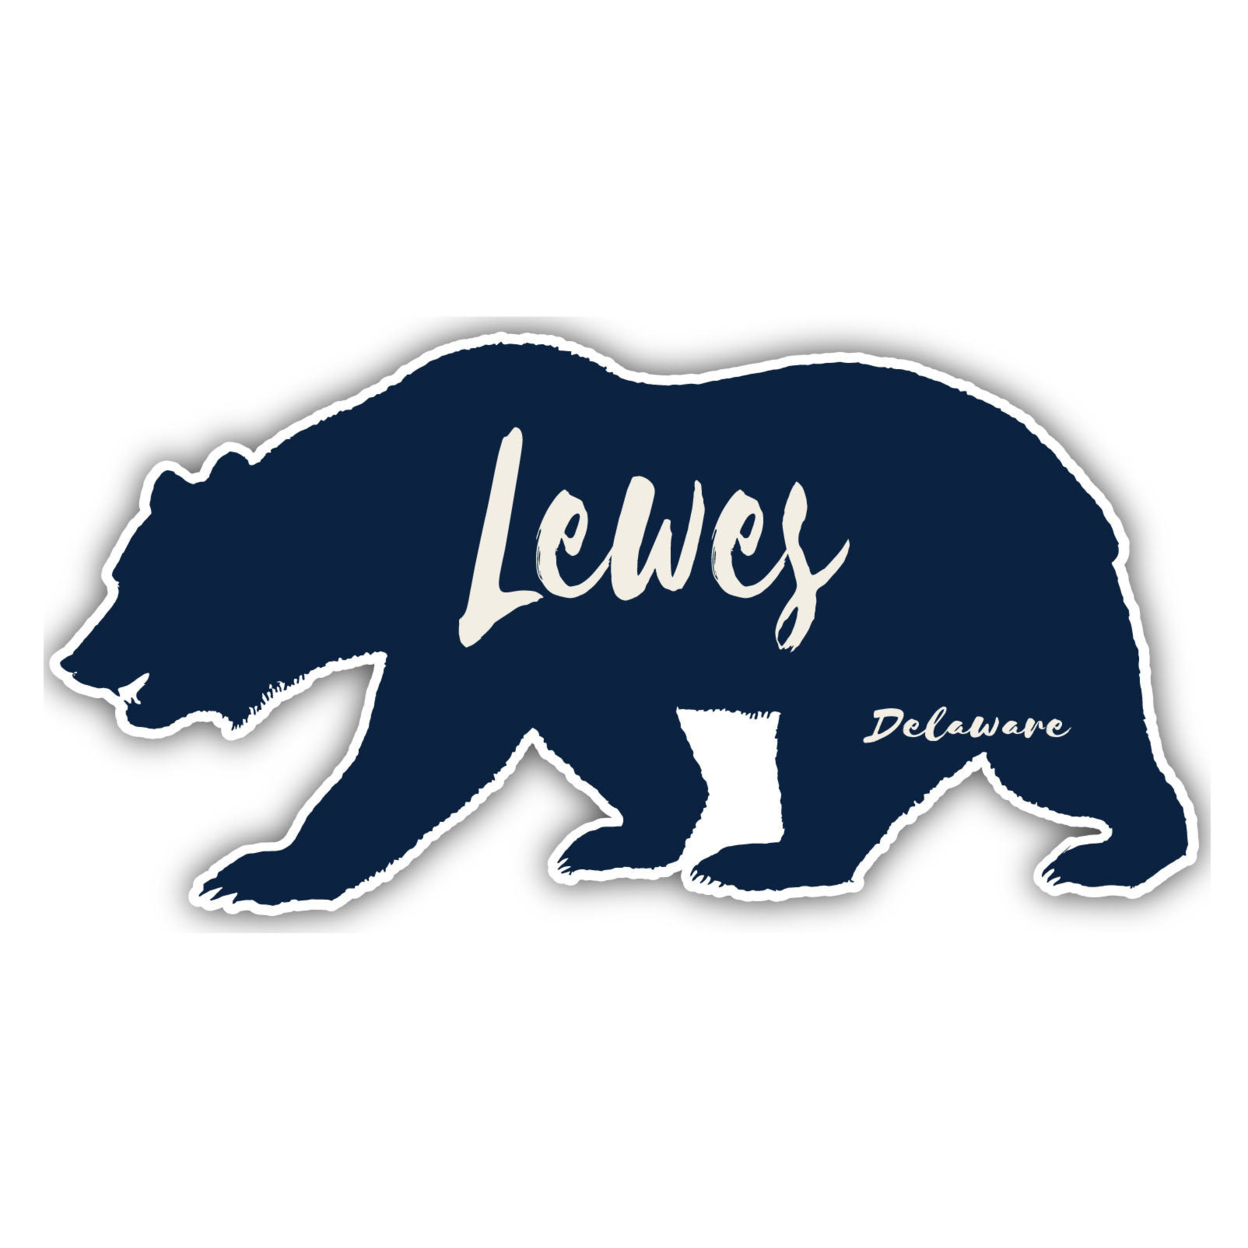 Lewes Delaware Souvenir Decorative Stickers (Choose Theme And Size) - 2-Inch, Bear